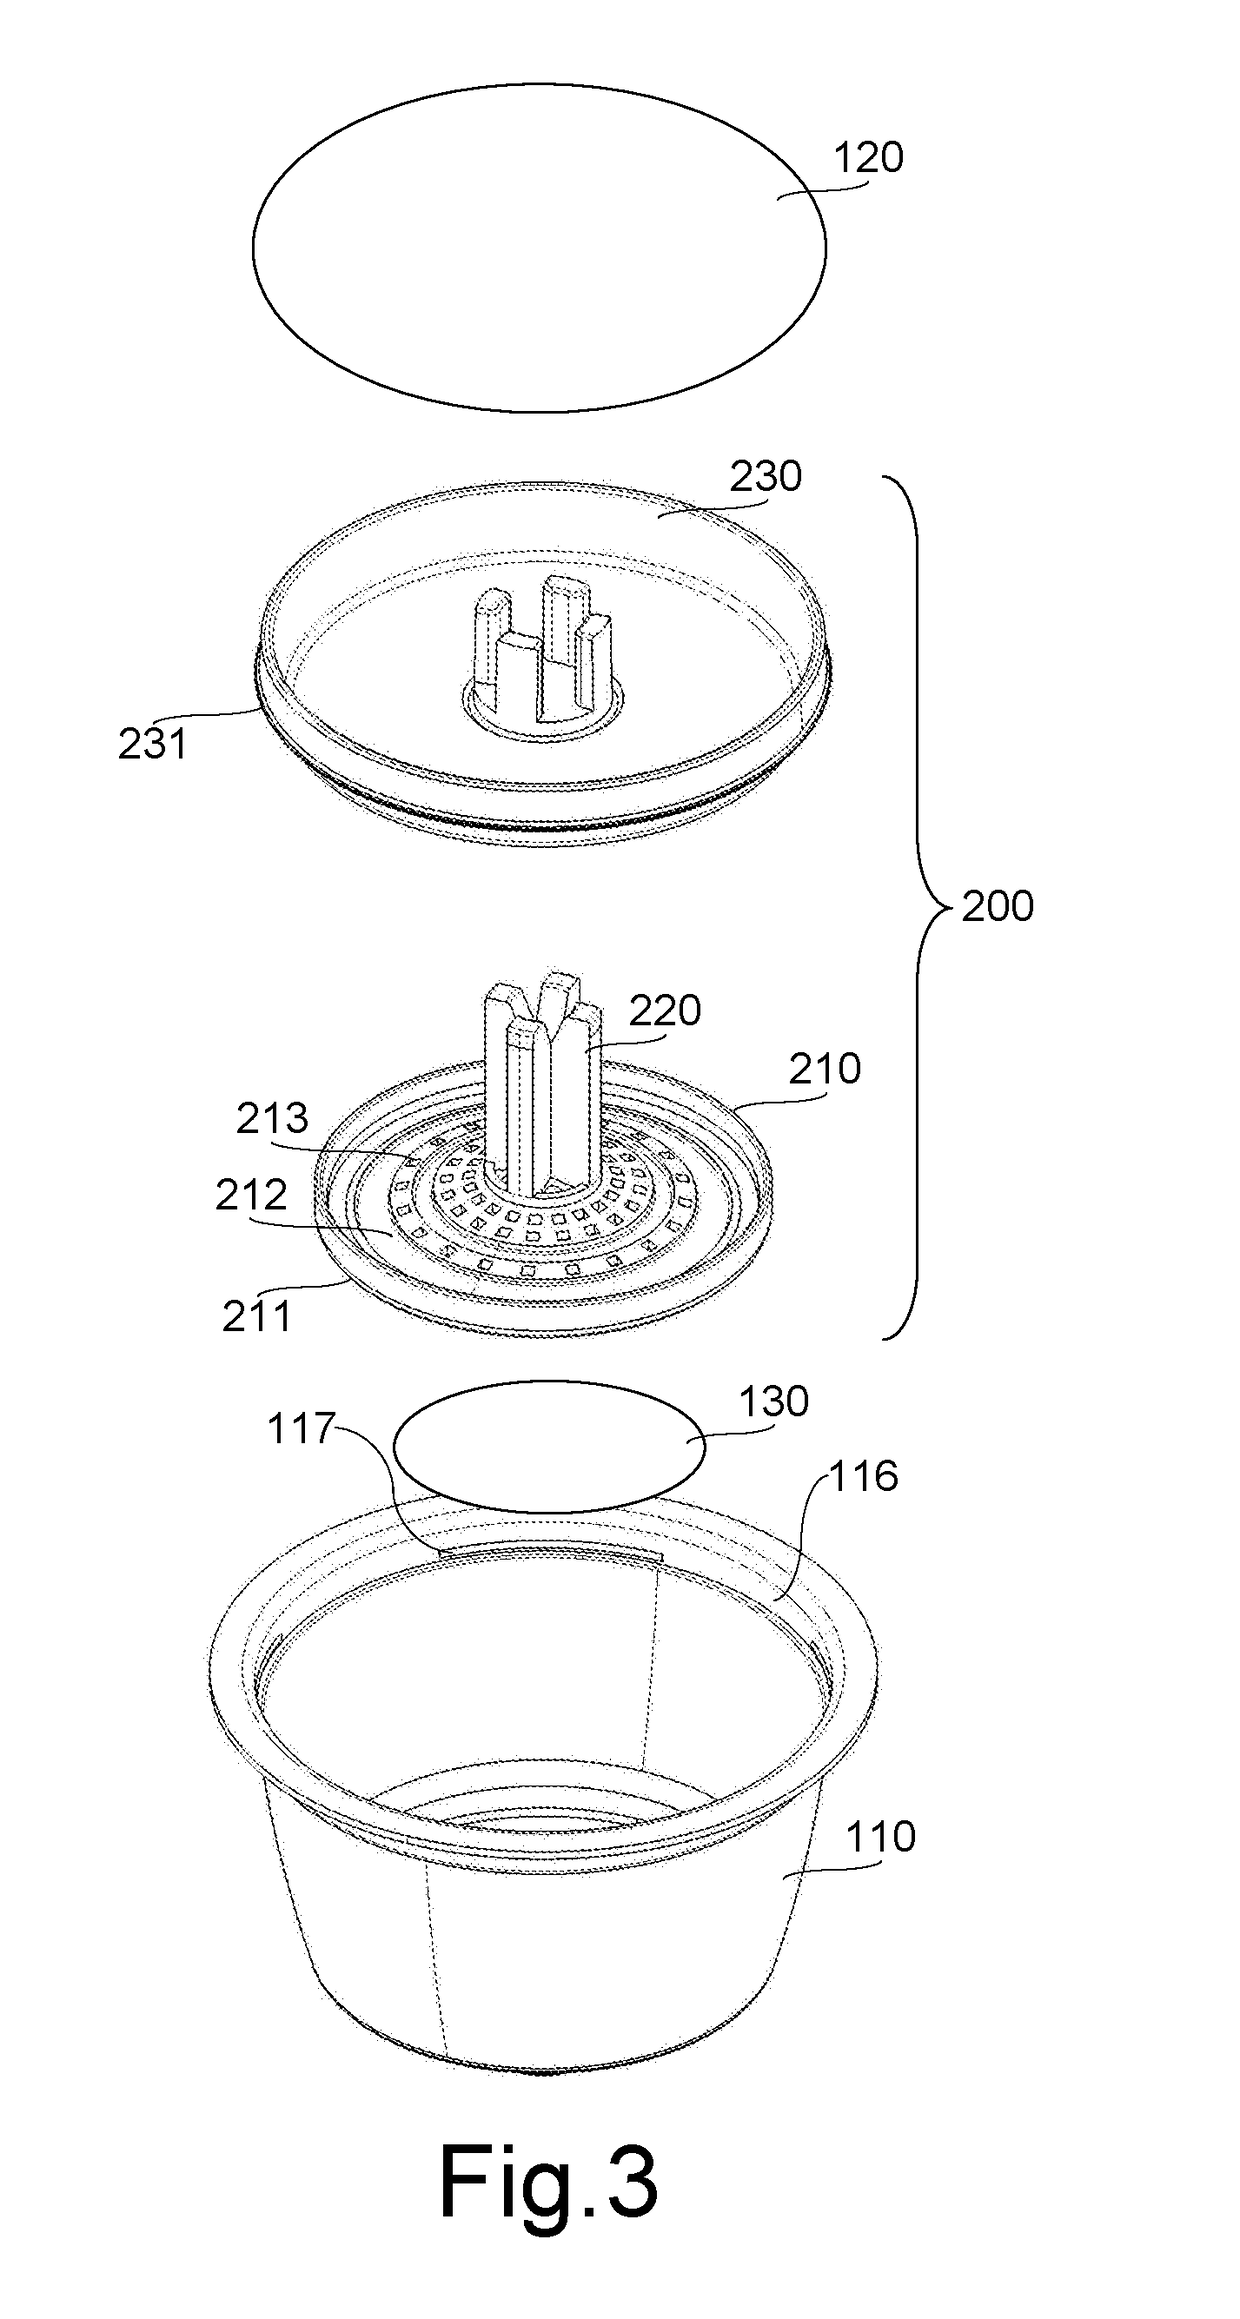 Single-use capsule for machines for the dispensing of infused beverages